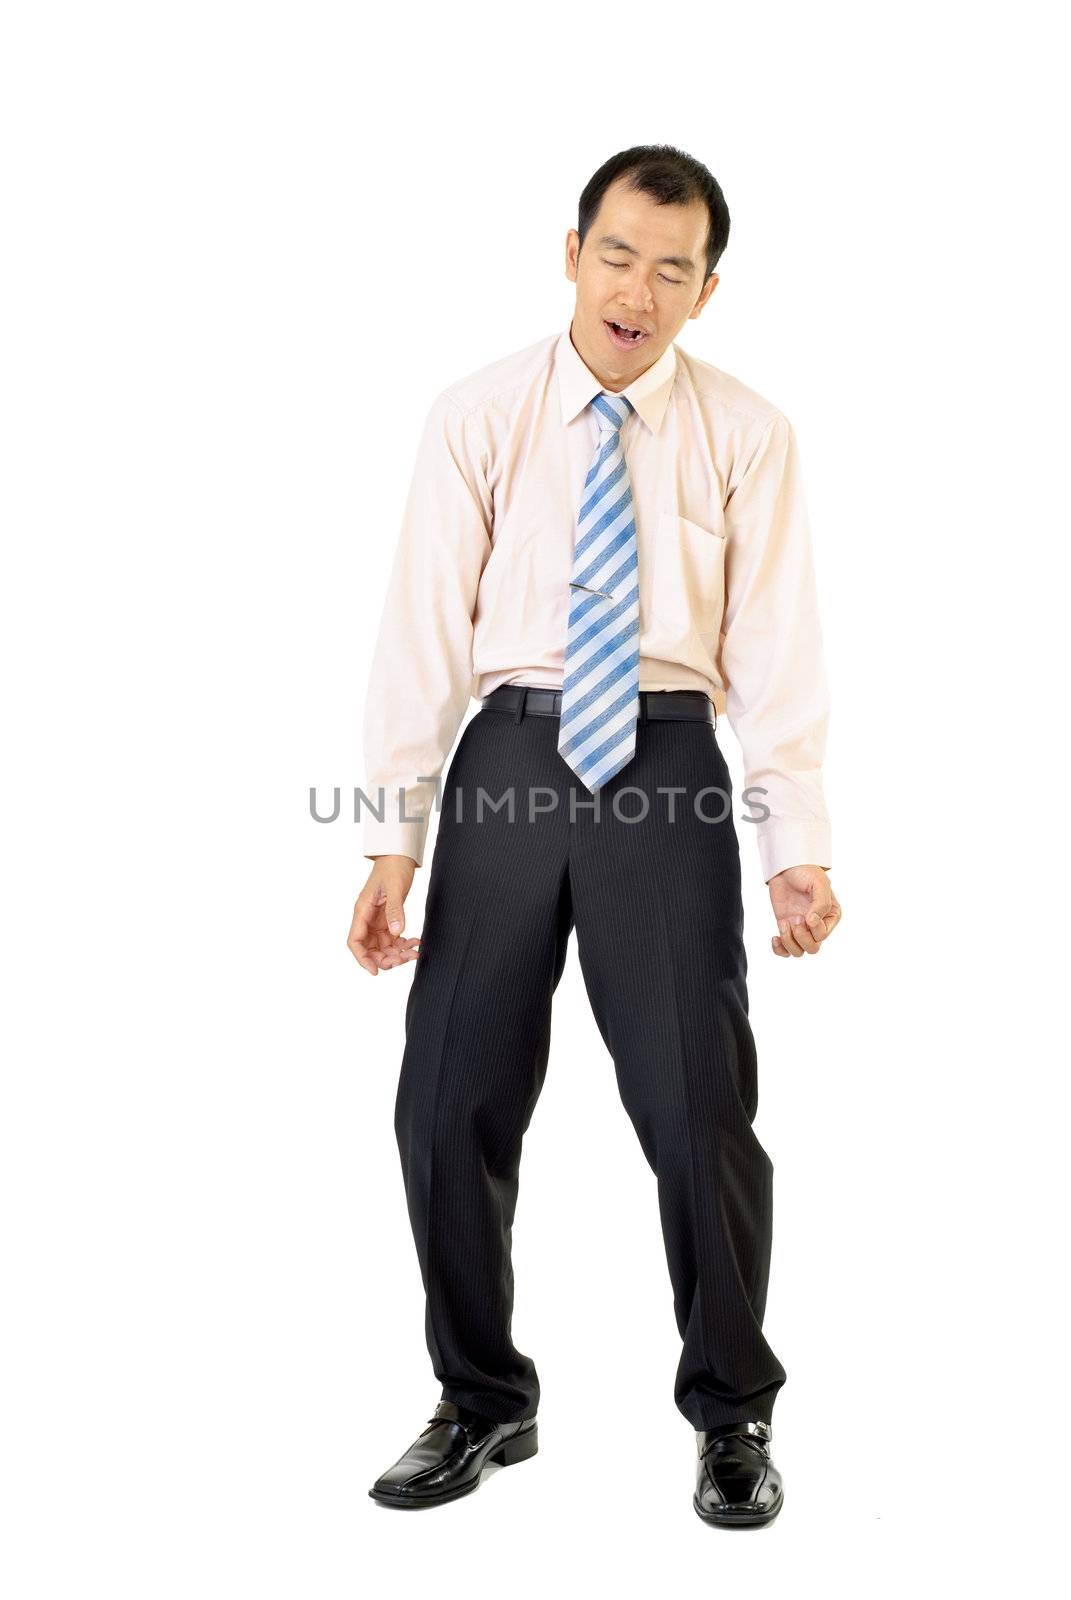 Tired businessman standing feebly on white background.